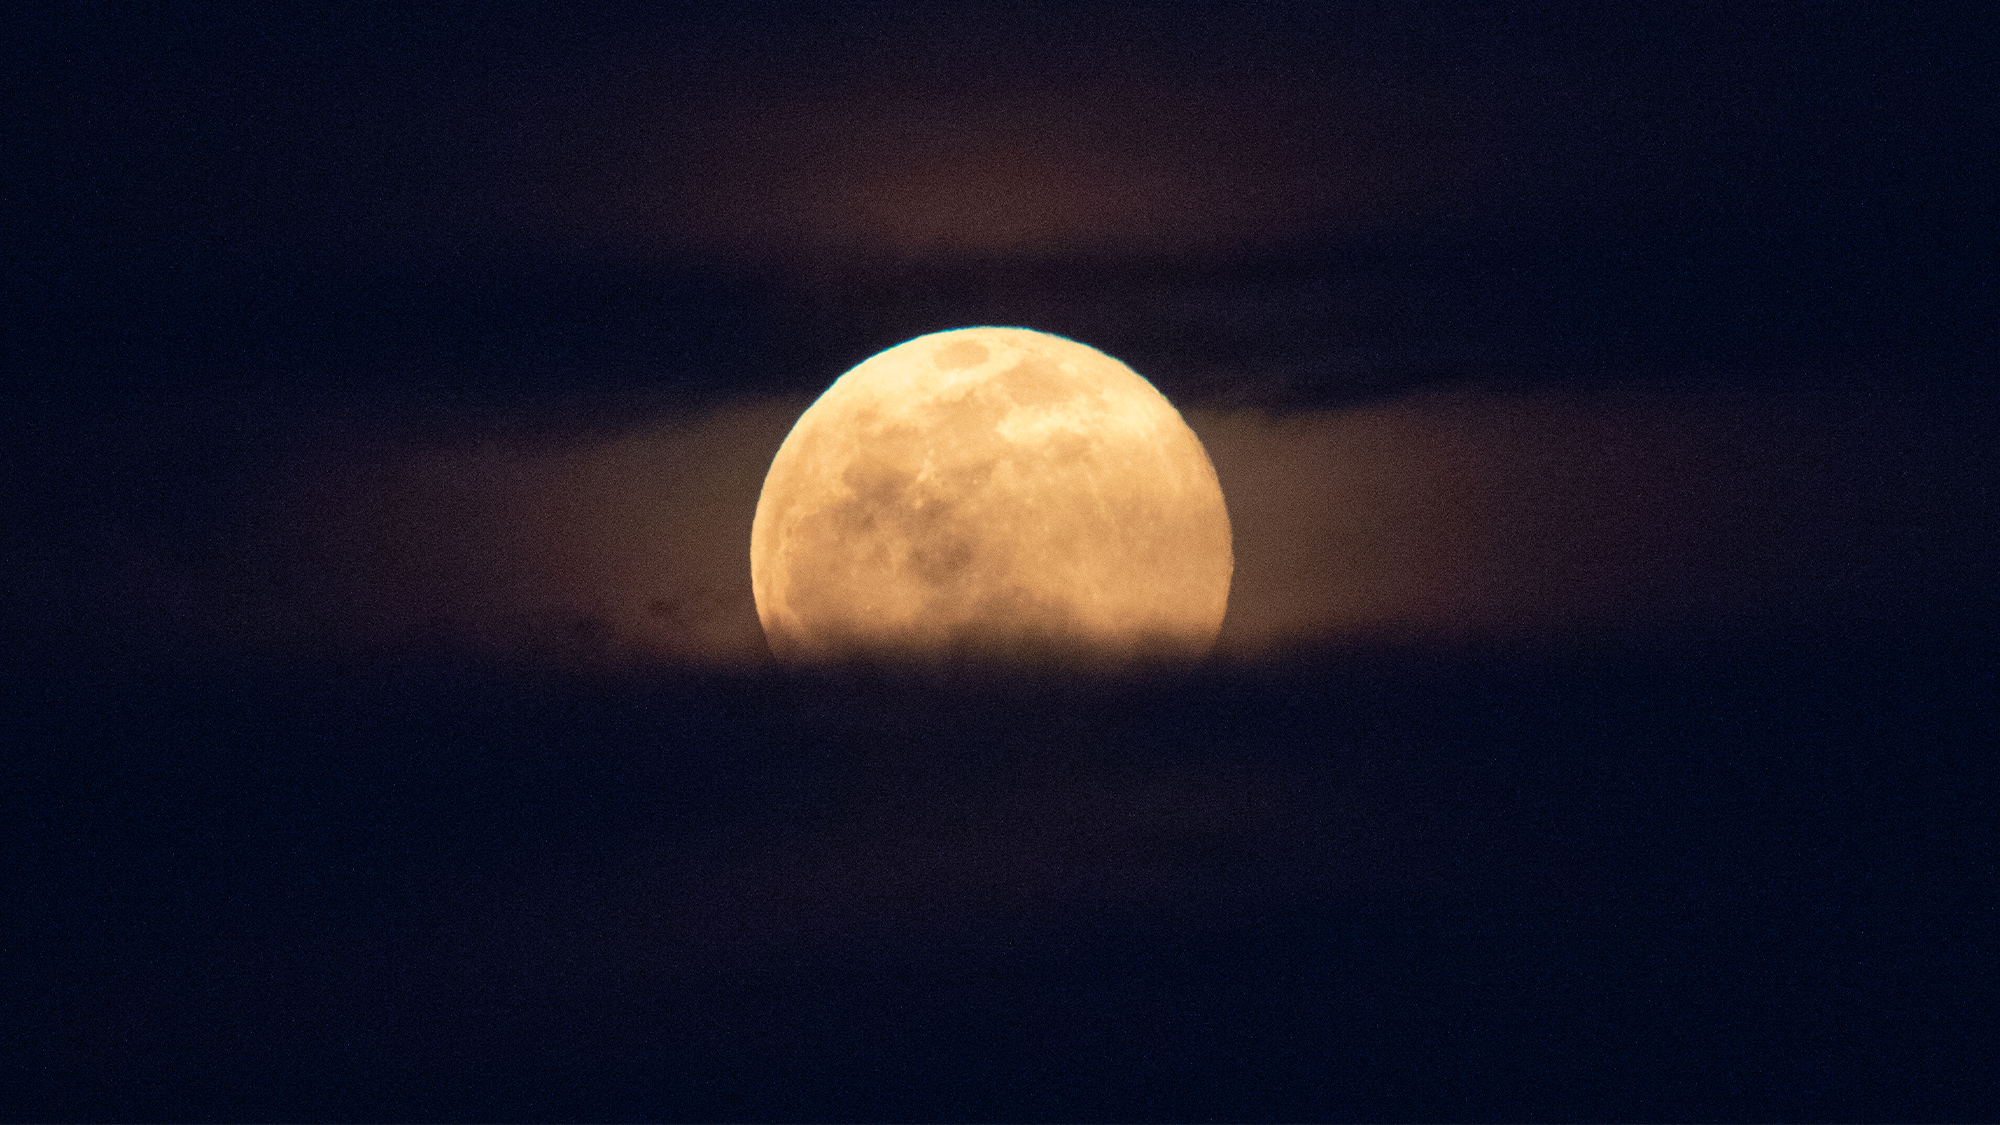 The full moon rises, with clouds below and behind it.